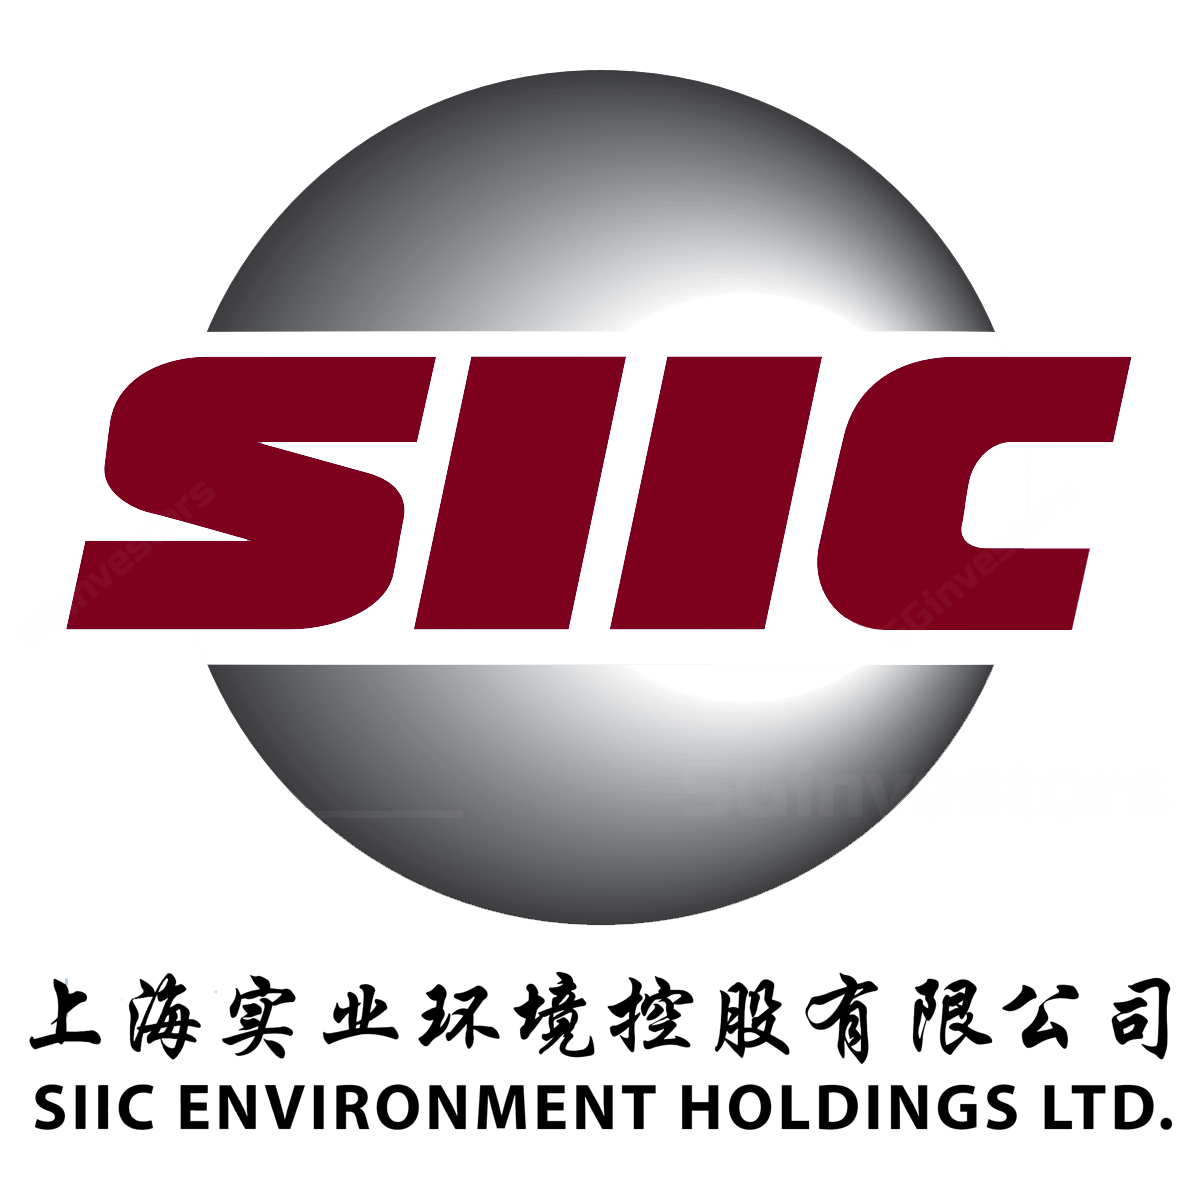 SIIC Environment - DBS Vickers 2017-01-17: Room for more deals